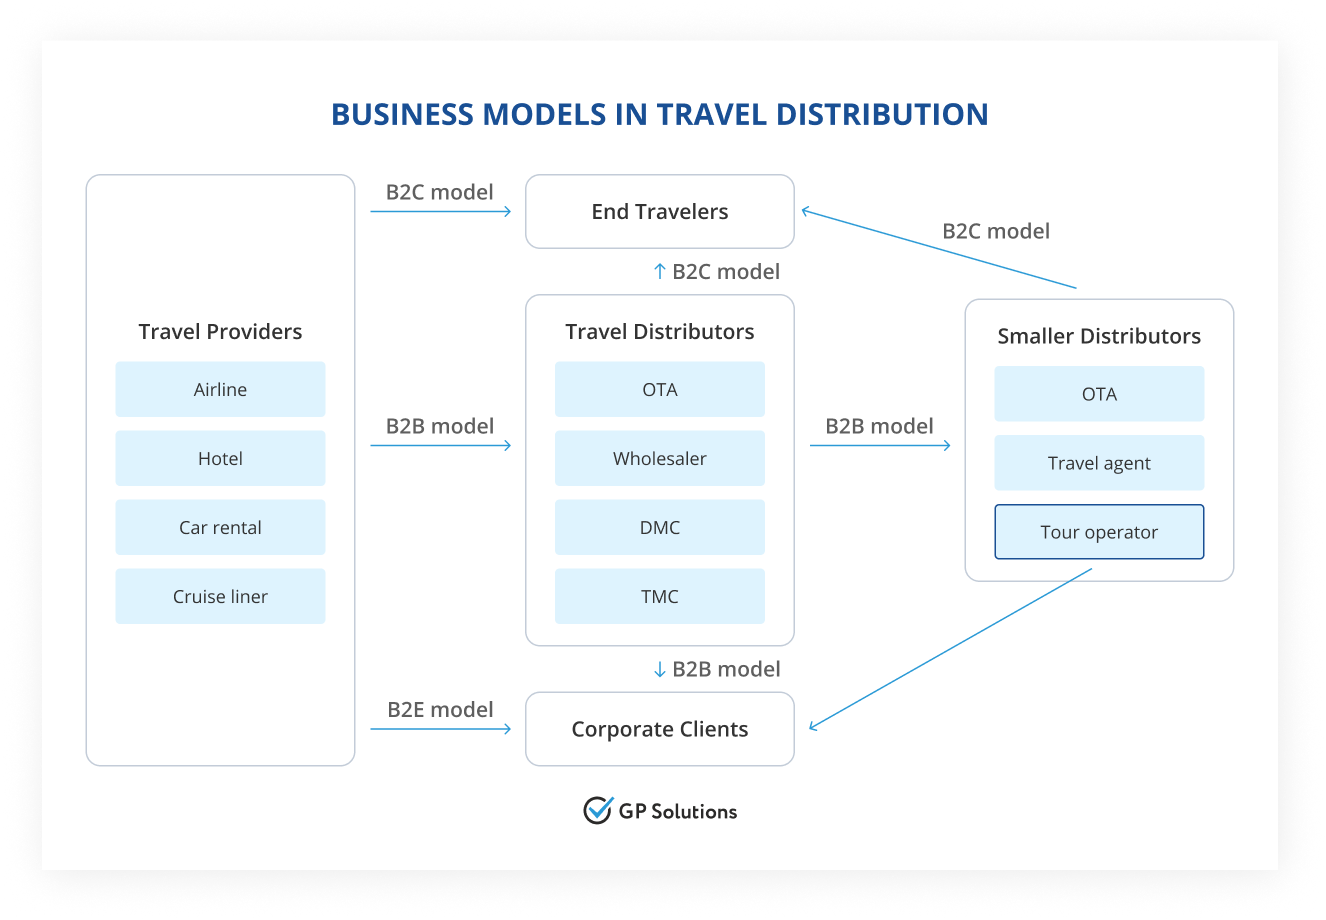 Business models in travel distribution